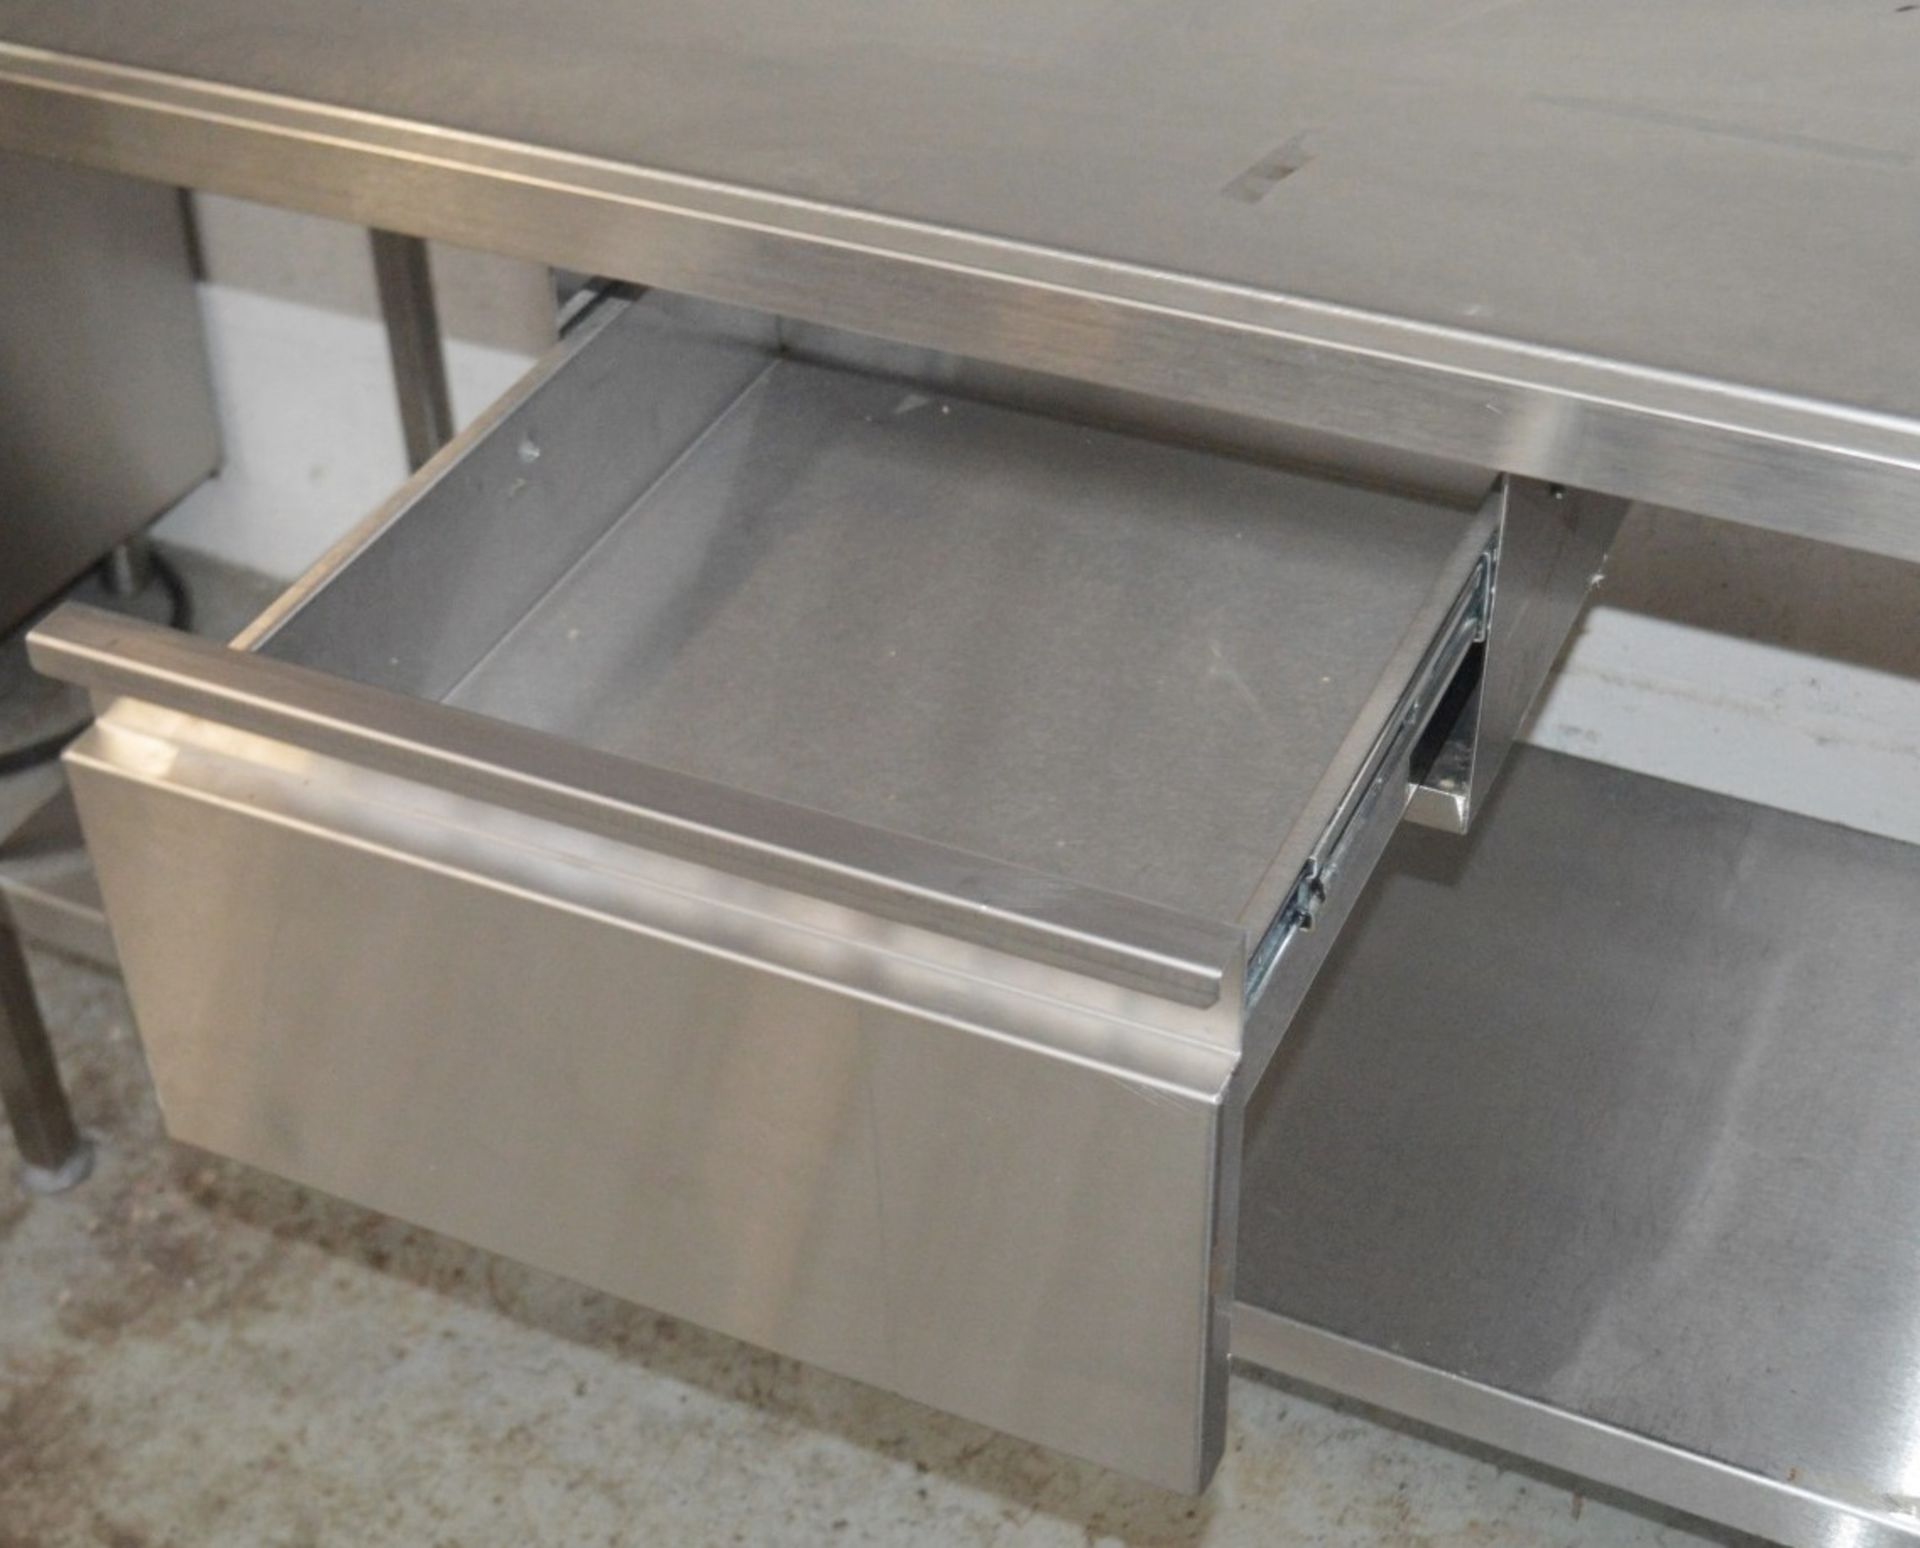 1 x Stainless Steel Commercial Kitchen Prep Counter With Drawer And Upstand - Dimensions: H86 x W150 - Image 2 of 5